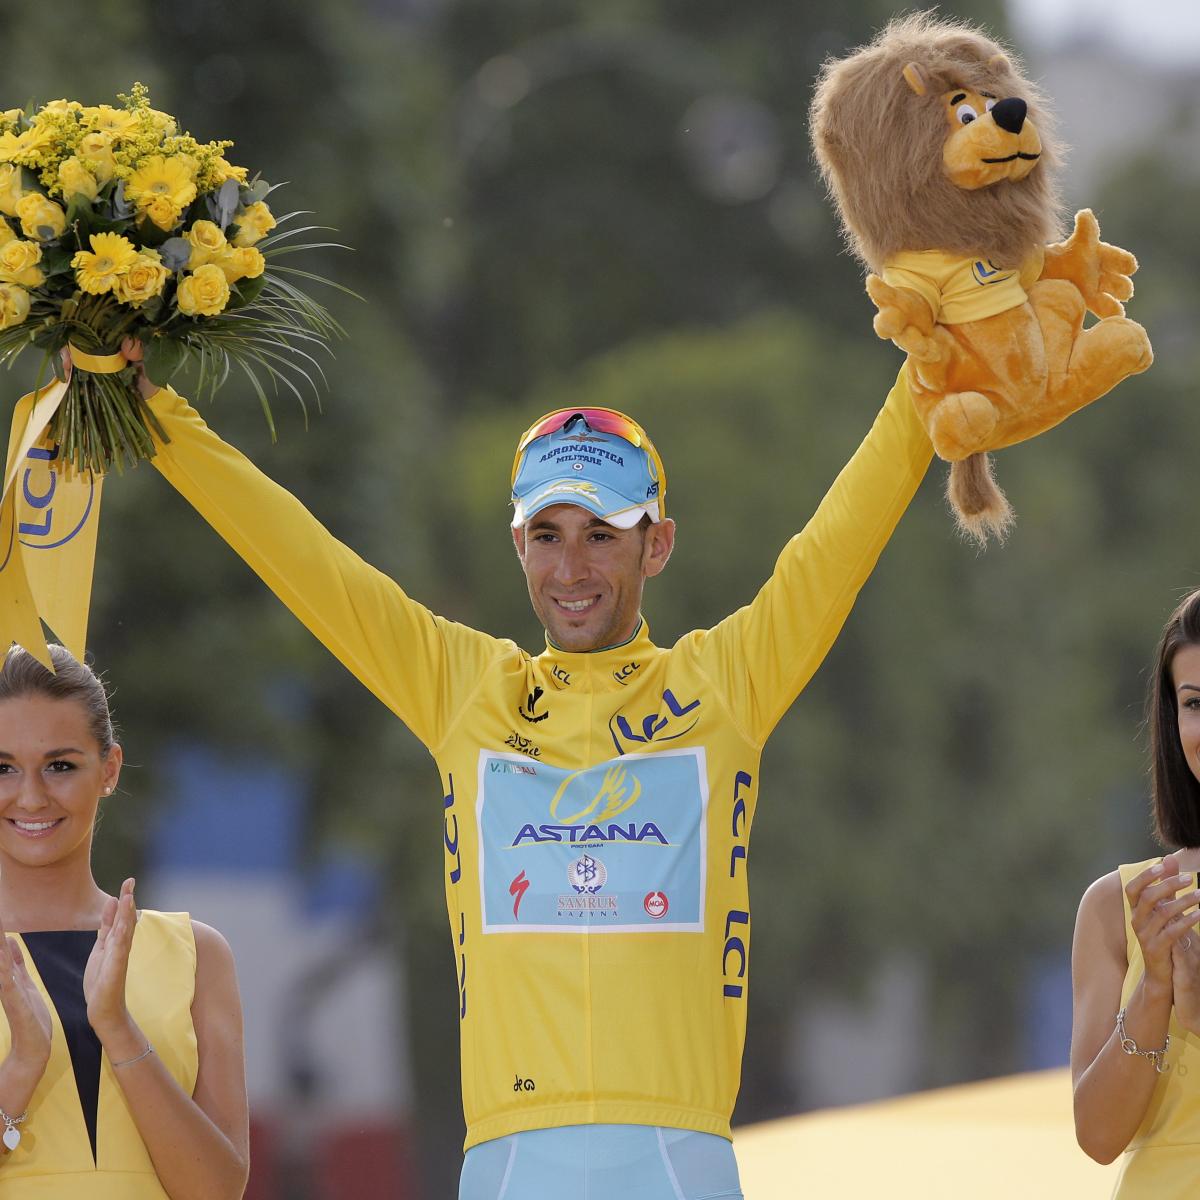 Tour De France 2014: Jersey Winners, General Classification Results and